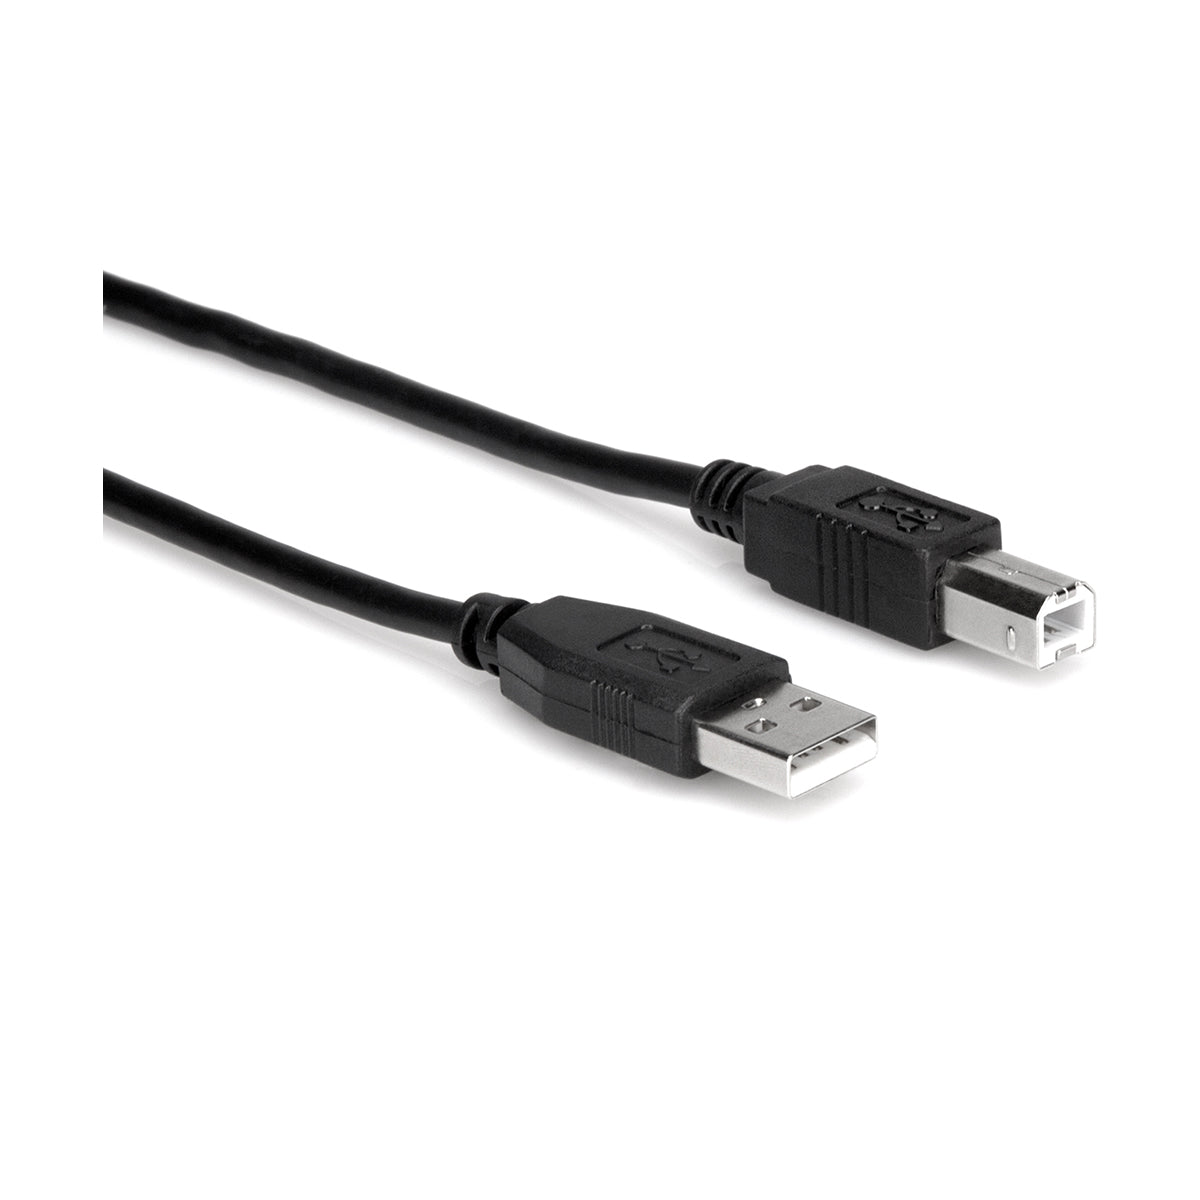 Hosa USB 2.0 Cable 15’ Type A-B